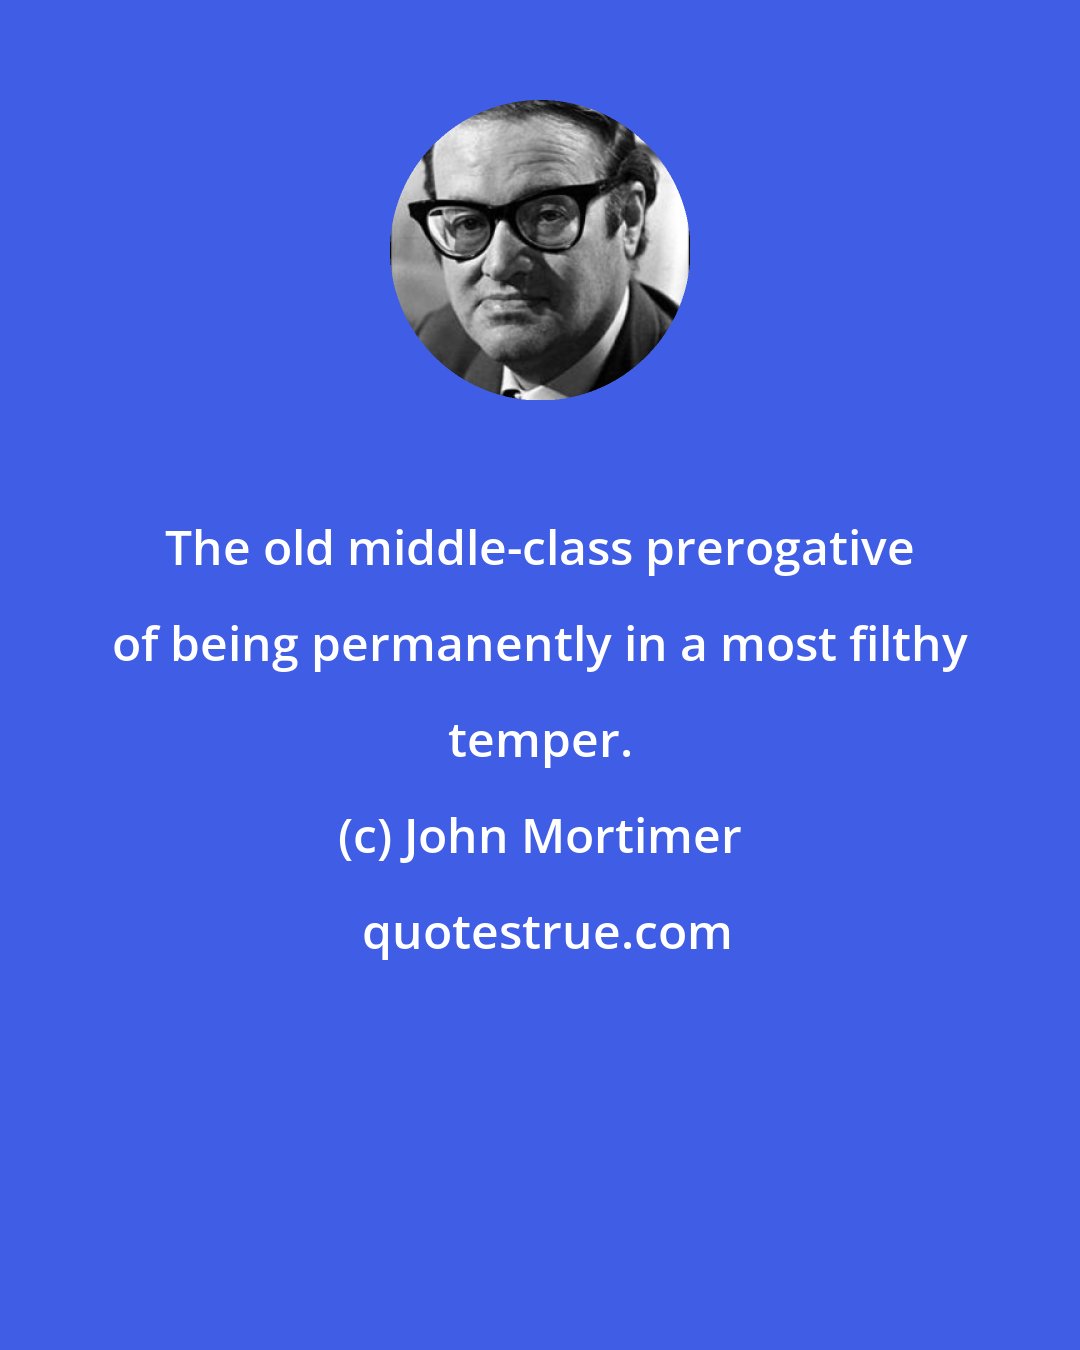 John Mortimer: The old middle-class prerogative of being permanently in a most filthy temper.